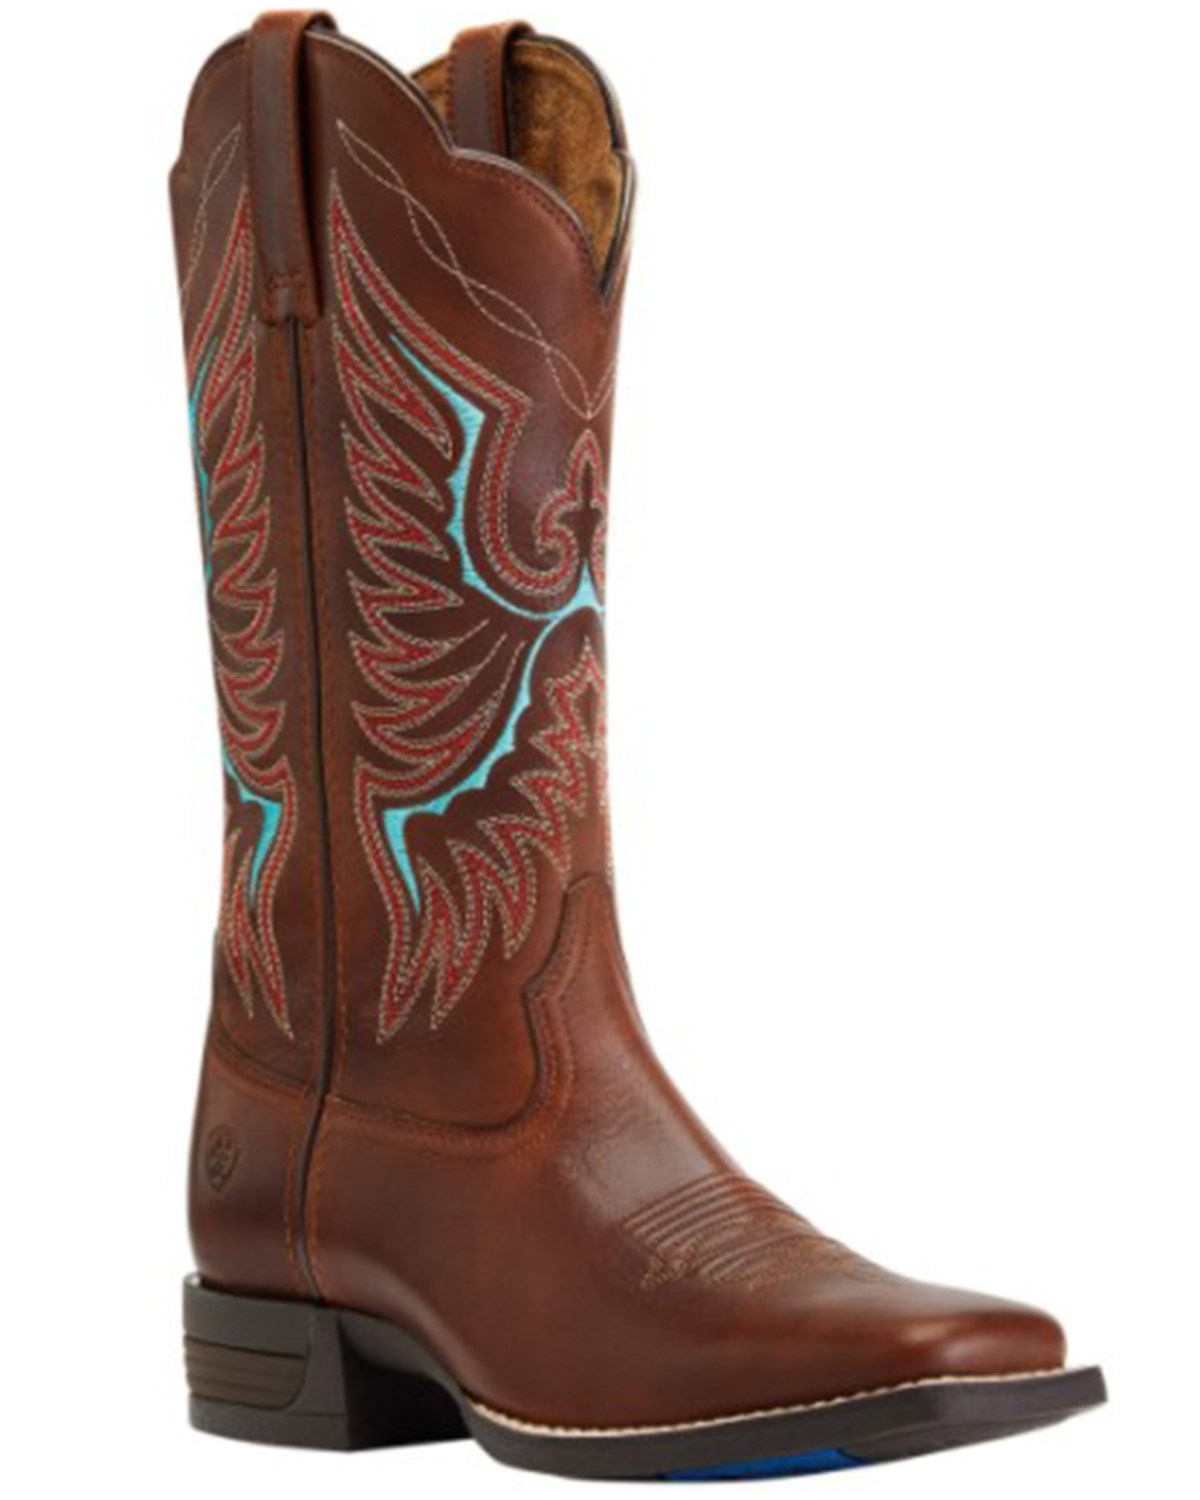 Ariat Women's Rockdale Shock Shield Performance Western Boots - Broad Square Toe